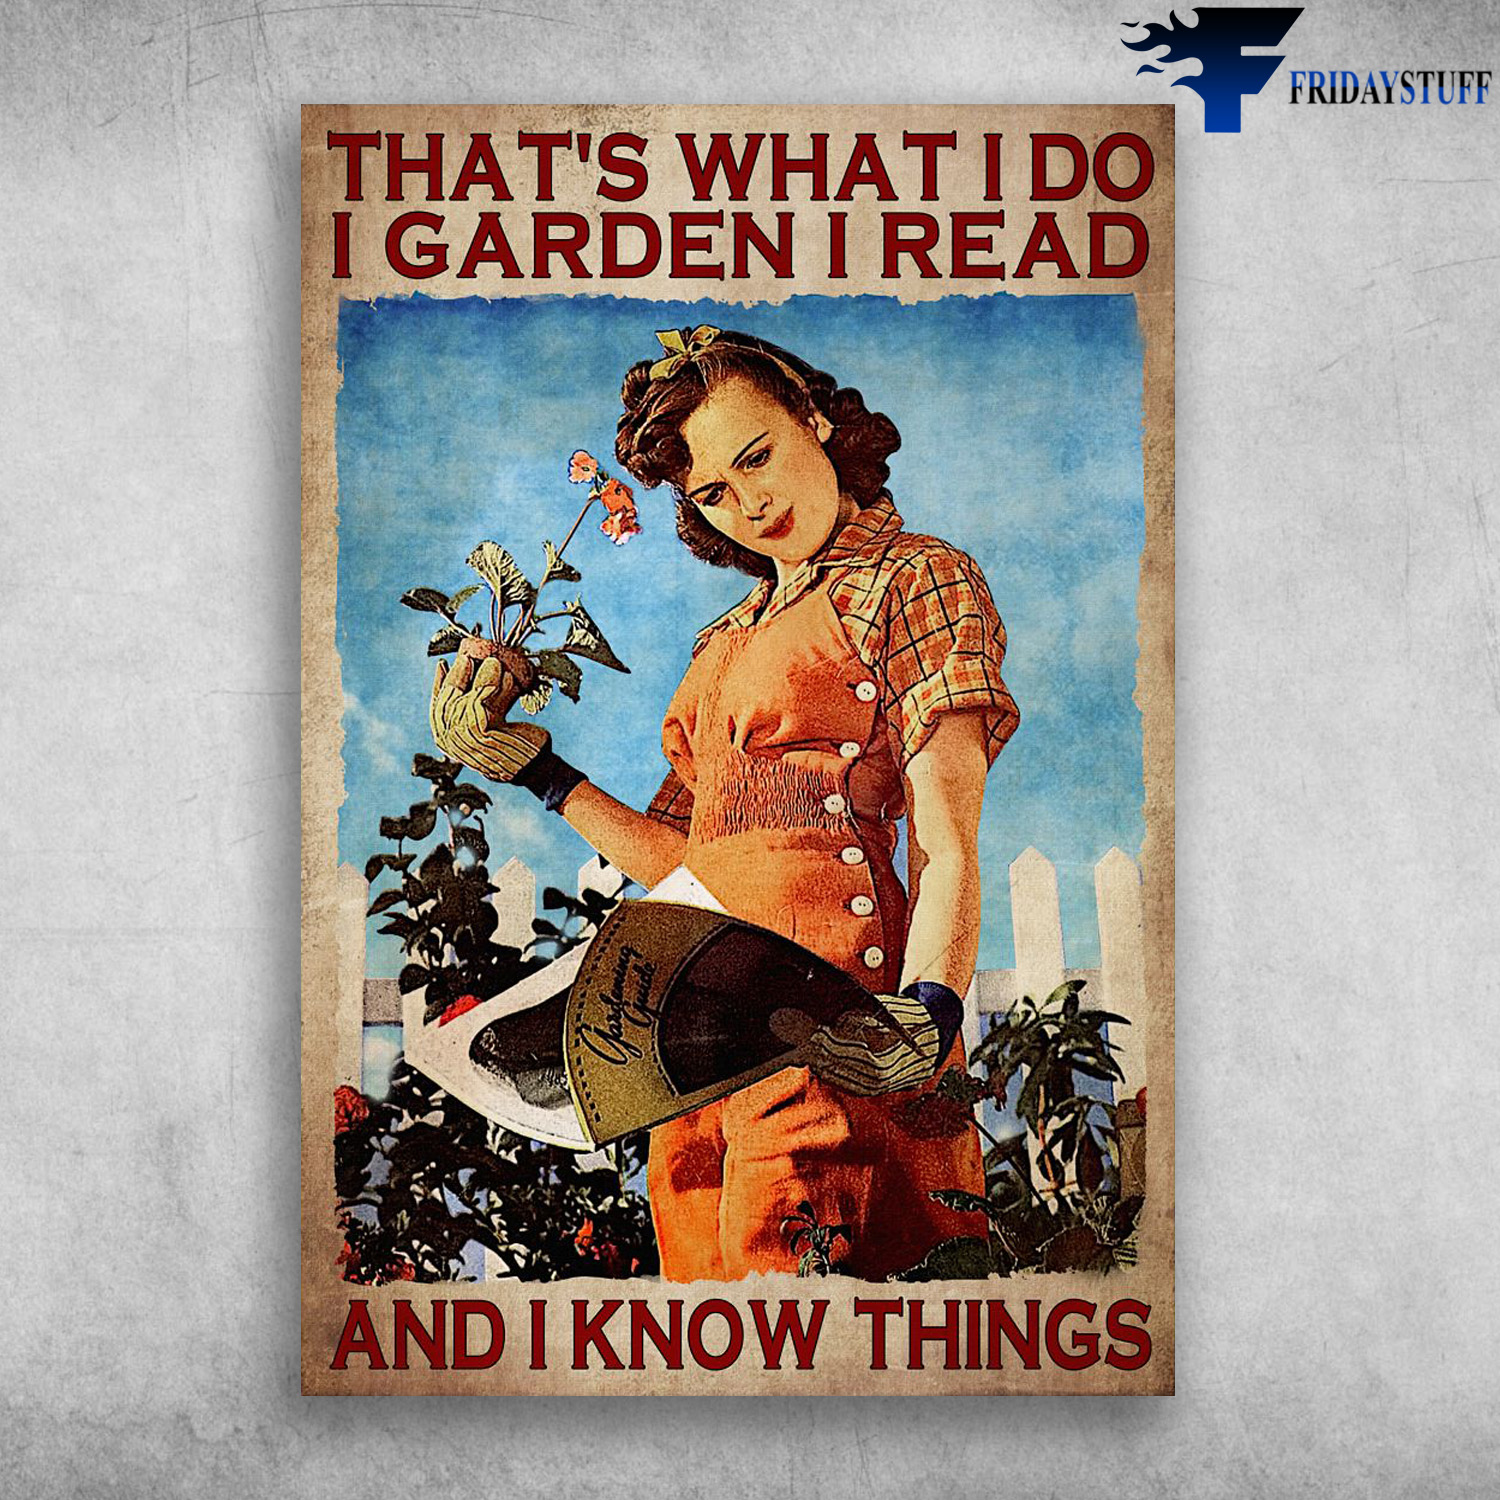 Girl Reading, Gardening - That's What I Do, I Garden, I Read, And I Know Things